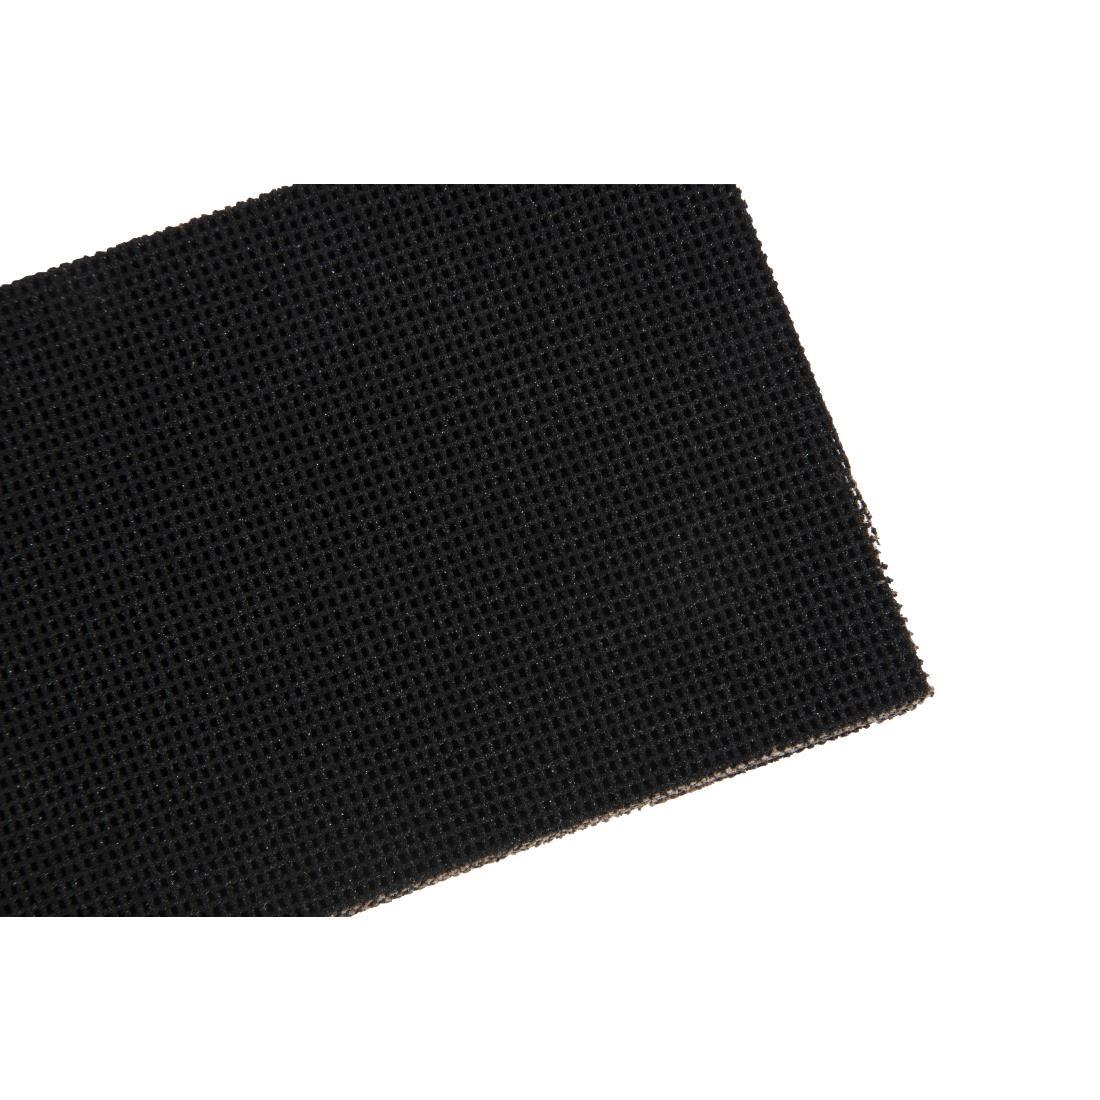 Griddle Cleaning Screens (Pack of 20) - F963  - 6